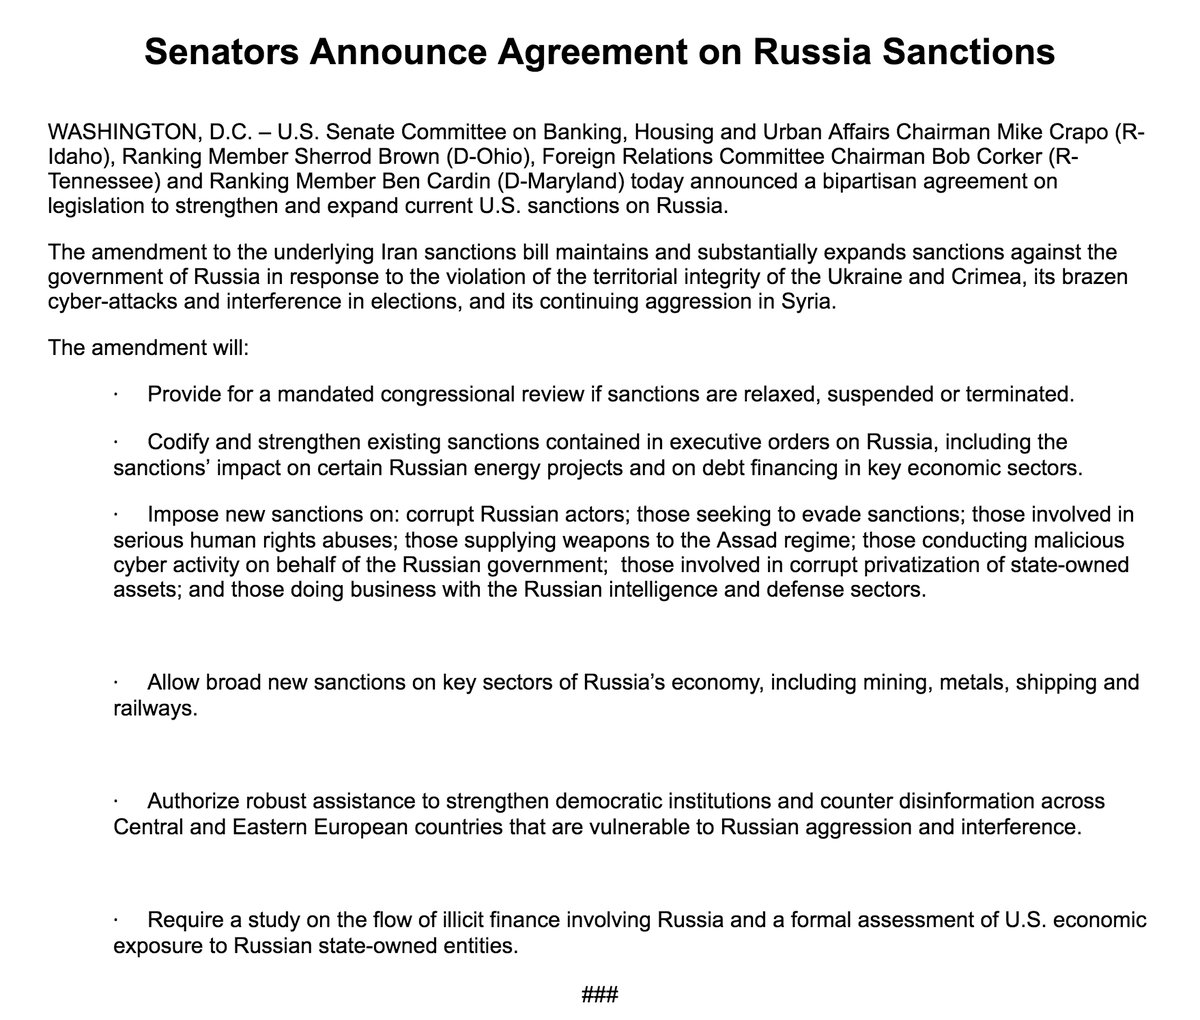 Senators have an agreement on new sanctions against Russia; deal bans Trump from lifting/easing the sanctions without congressional approval  